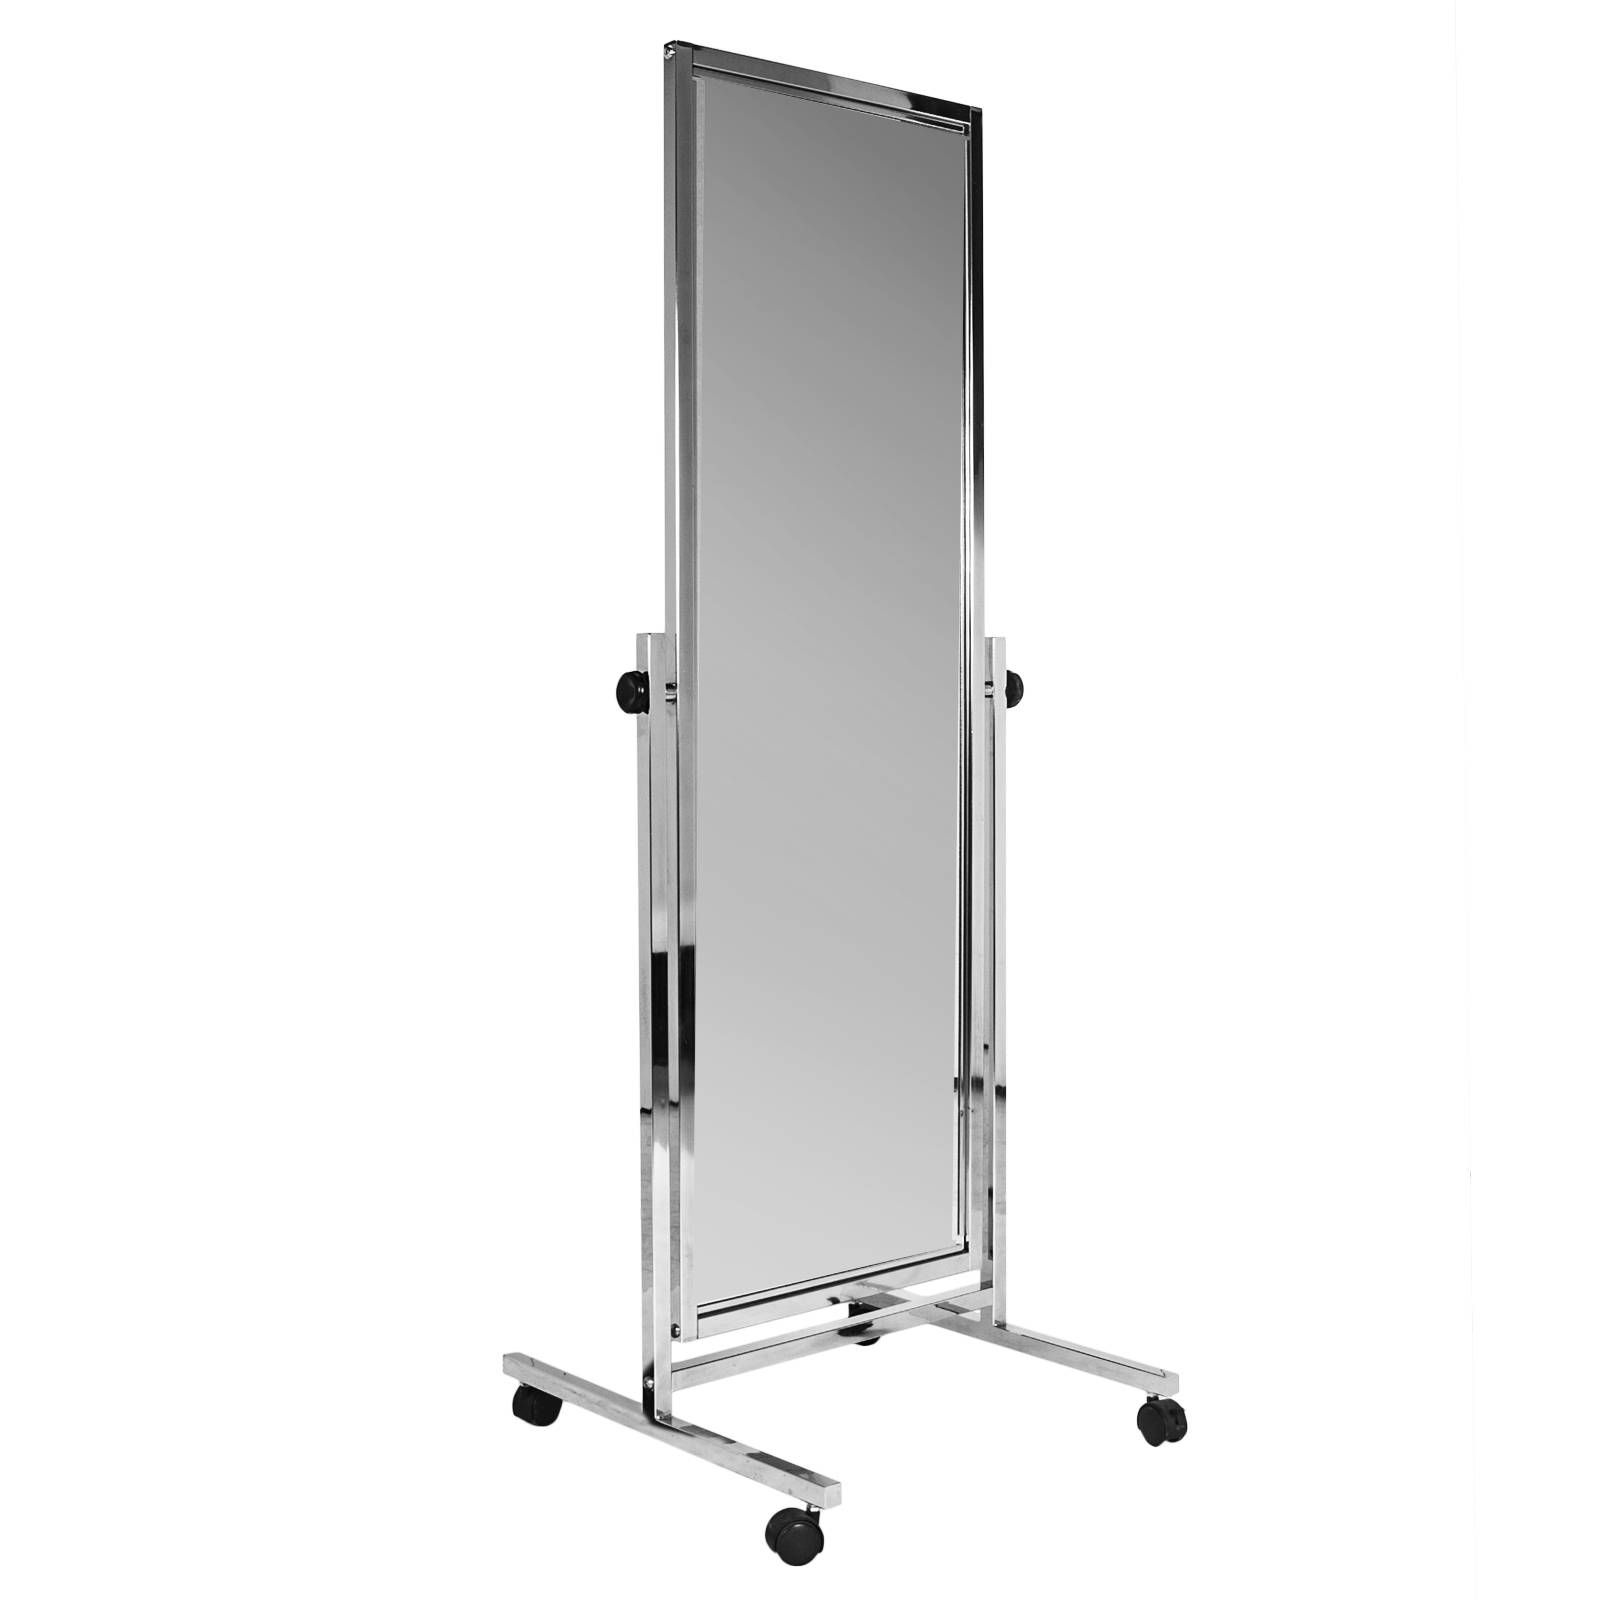 Floor Mirror Rentals | Event Furniture Rental | Delivery | Formdecor With Chrome Floor Mirrors (View 1 of 25)